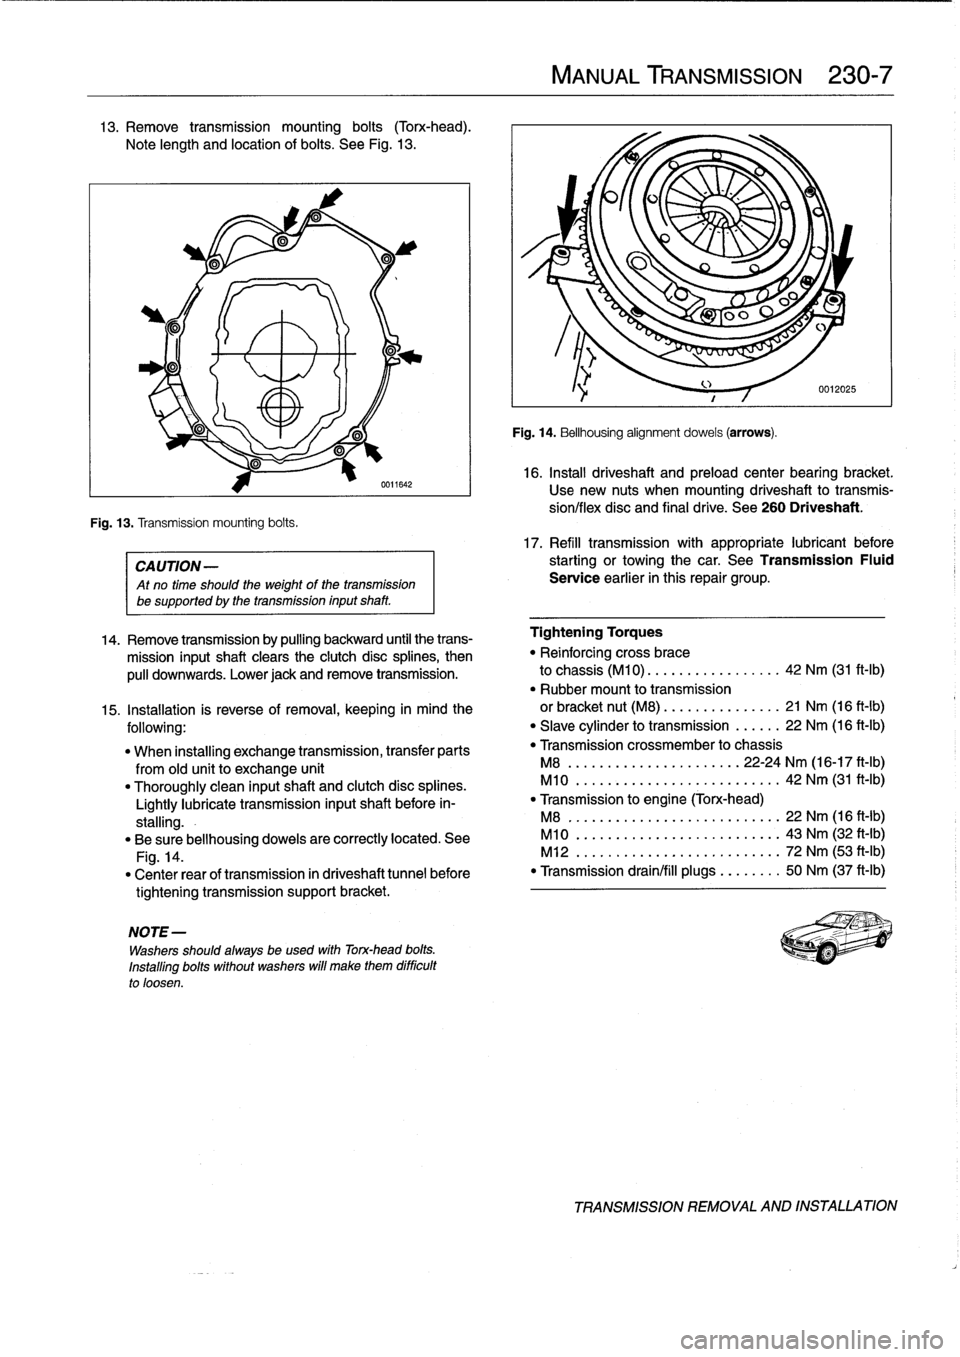 BMW 323i 1993 E36 Workshop Manual 13
.
Remove
transmission
mounting
bolts
(Torx-head)
.

Note
length
and
location
of
bolts
.
See
Fig
.
13
.

Fig
.
13
.
Transmission
mounting
bolts
.

0611642

CA
UTION-

Atno
time
should
the
weight
of
